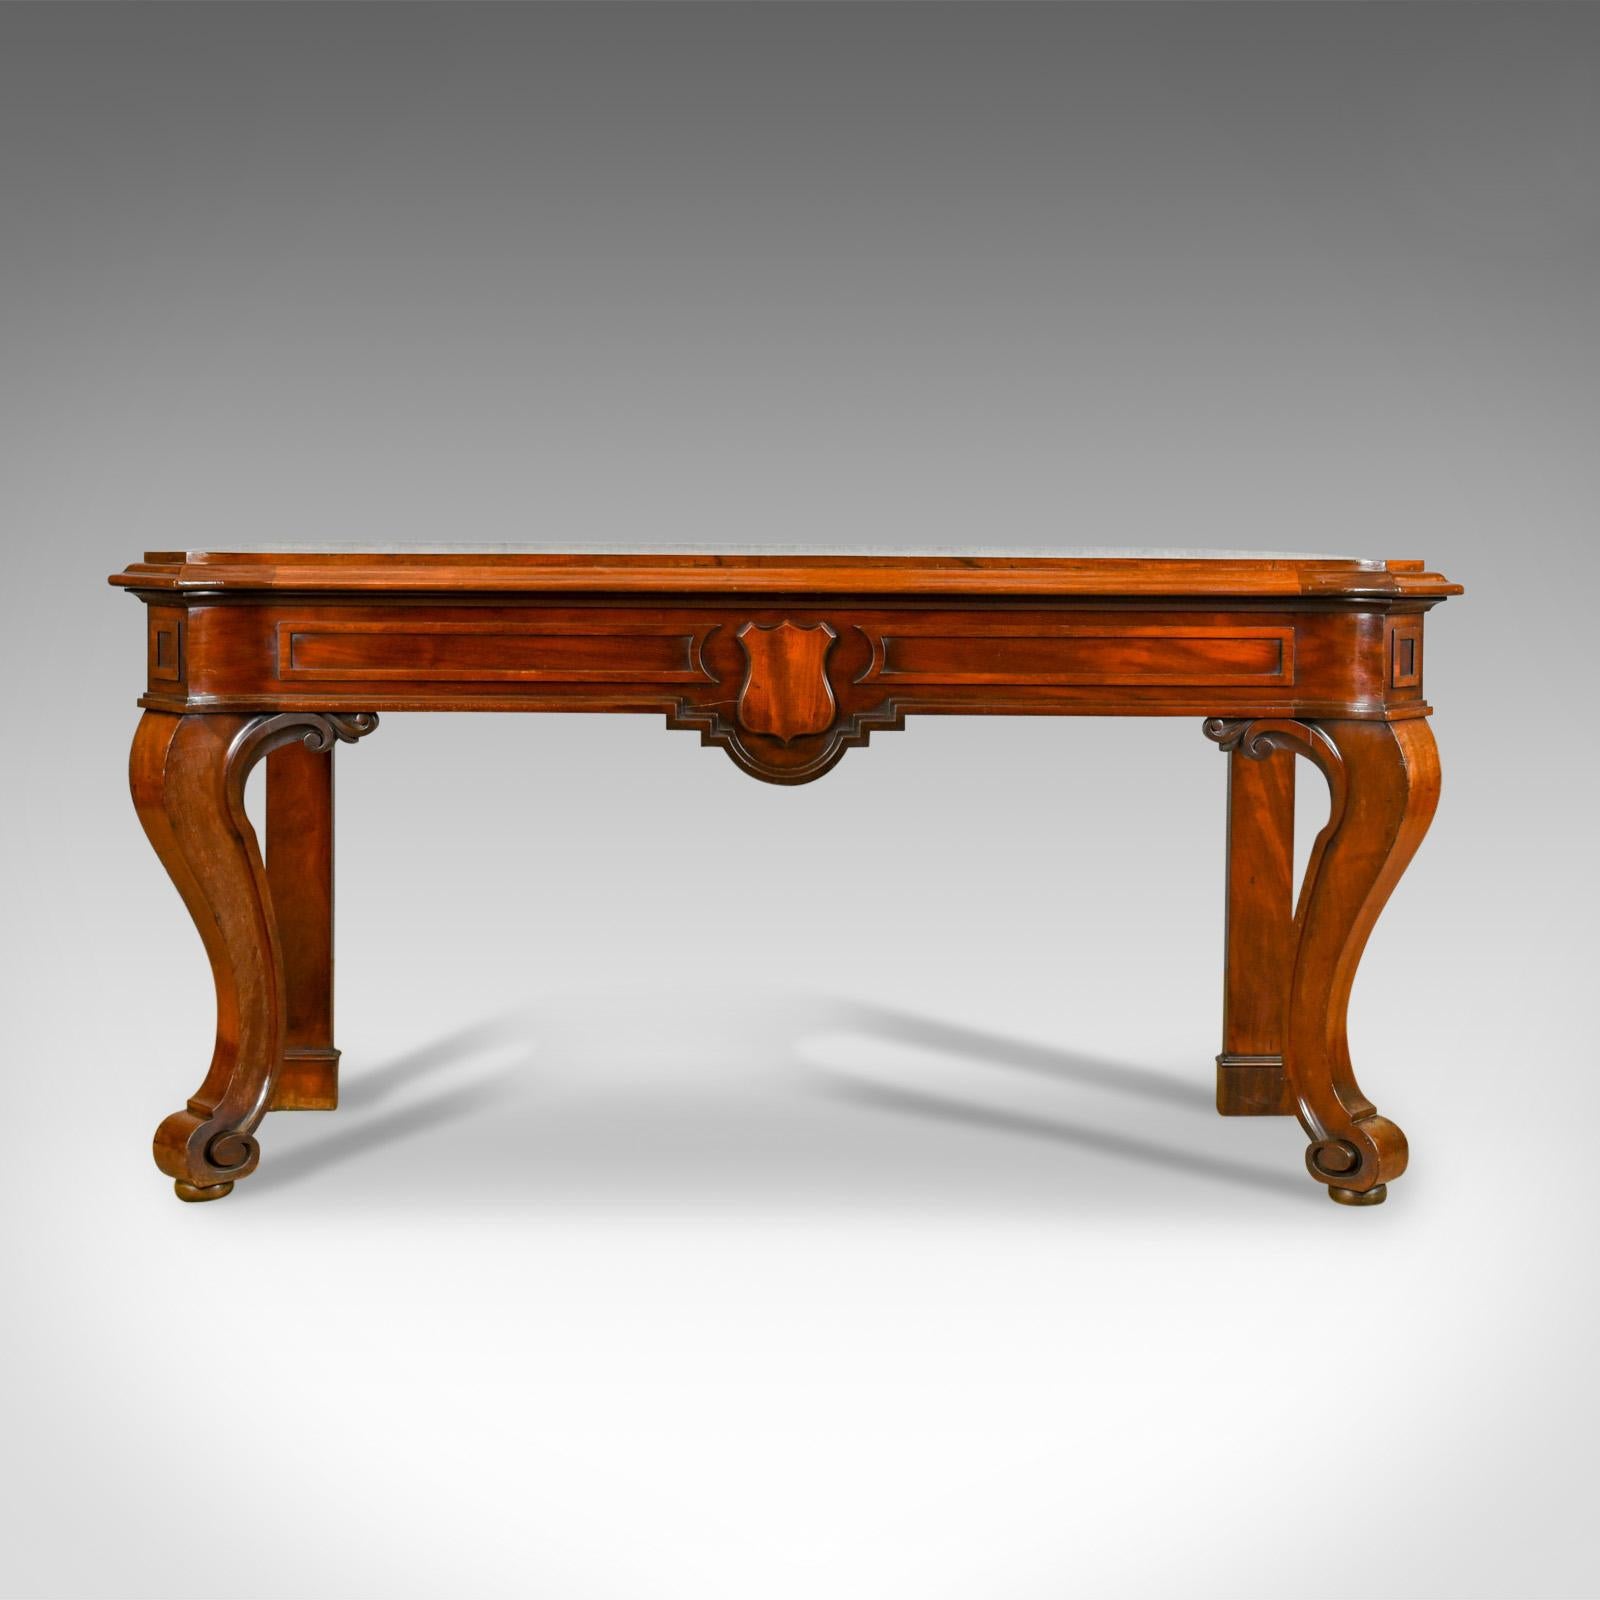 This is an antique console table, a Scottish, William IV, mahogany, serving table dating to the early 19th century, circa 1835.

Elaborate and attractive console or serving table 
First class mahogany in generous cuts with a deep, rich